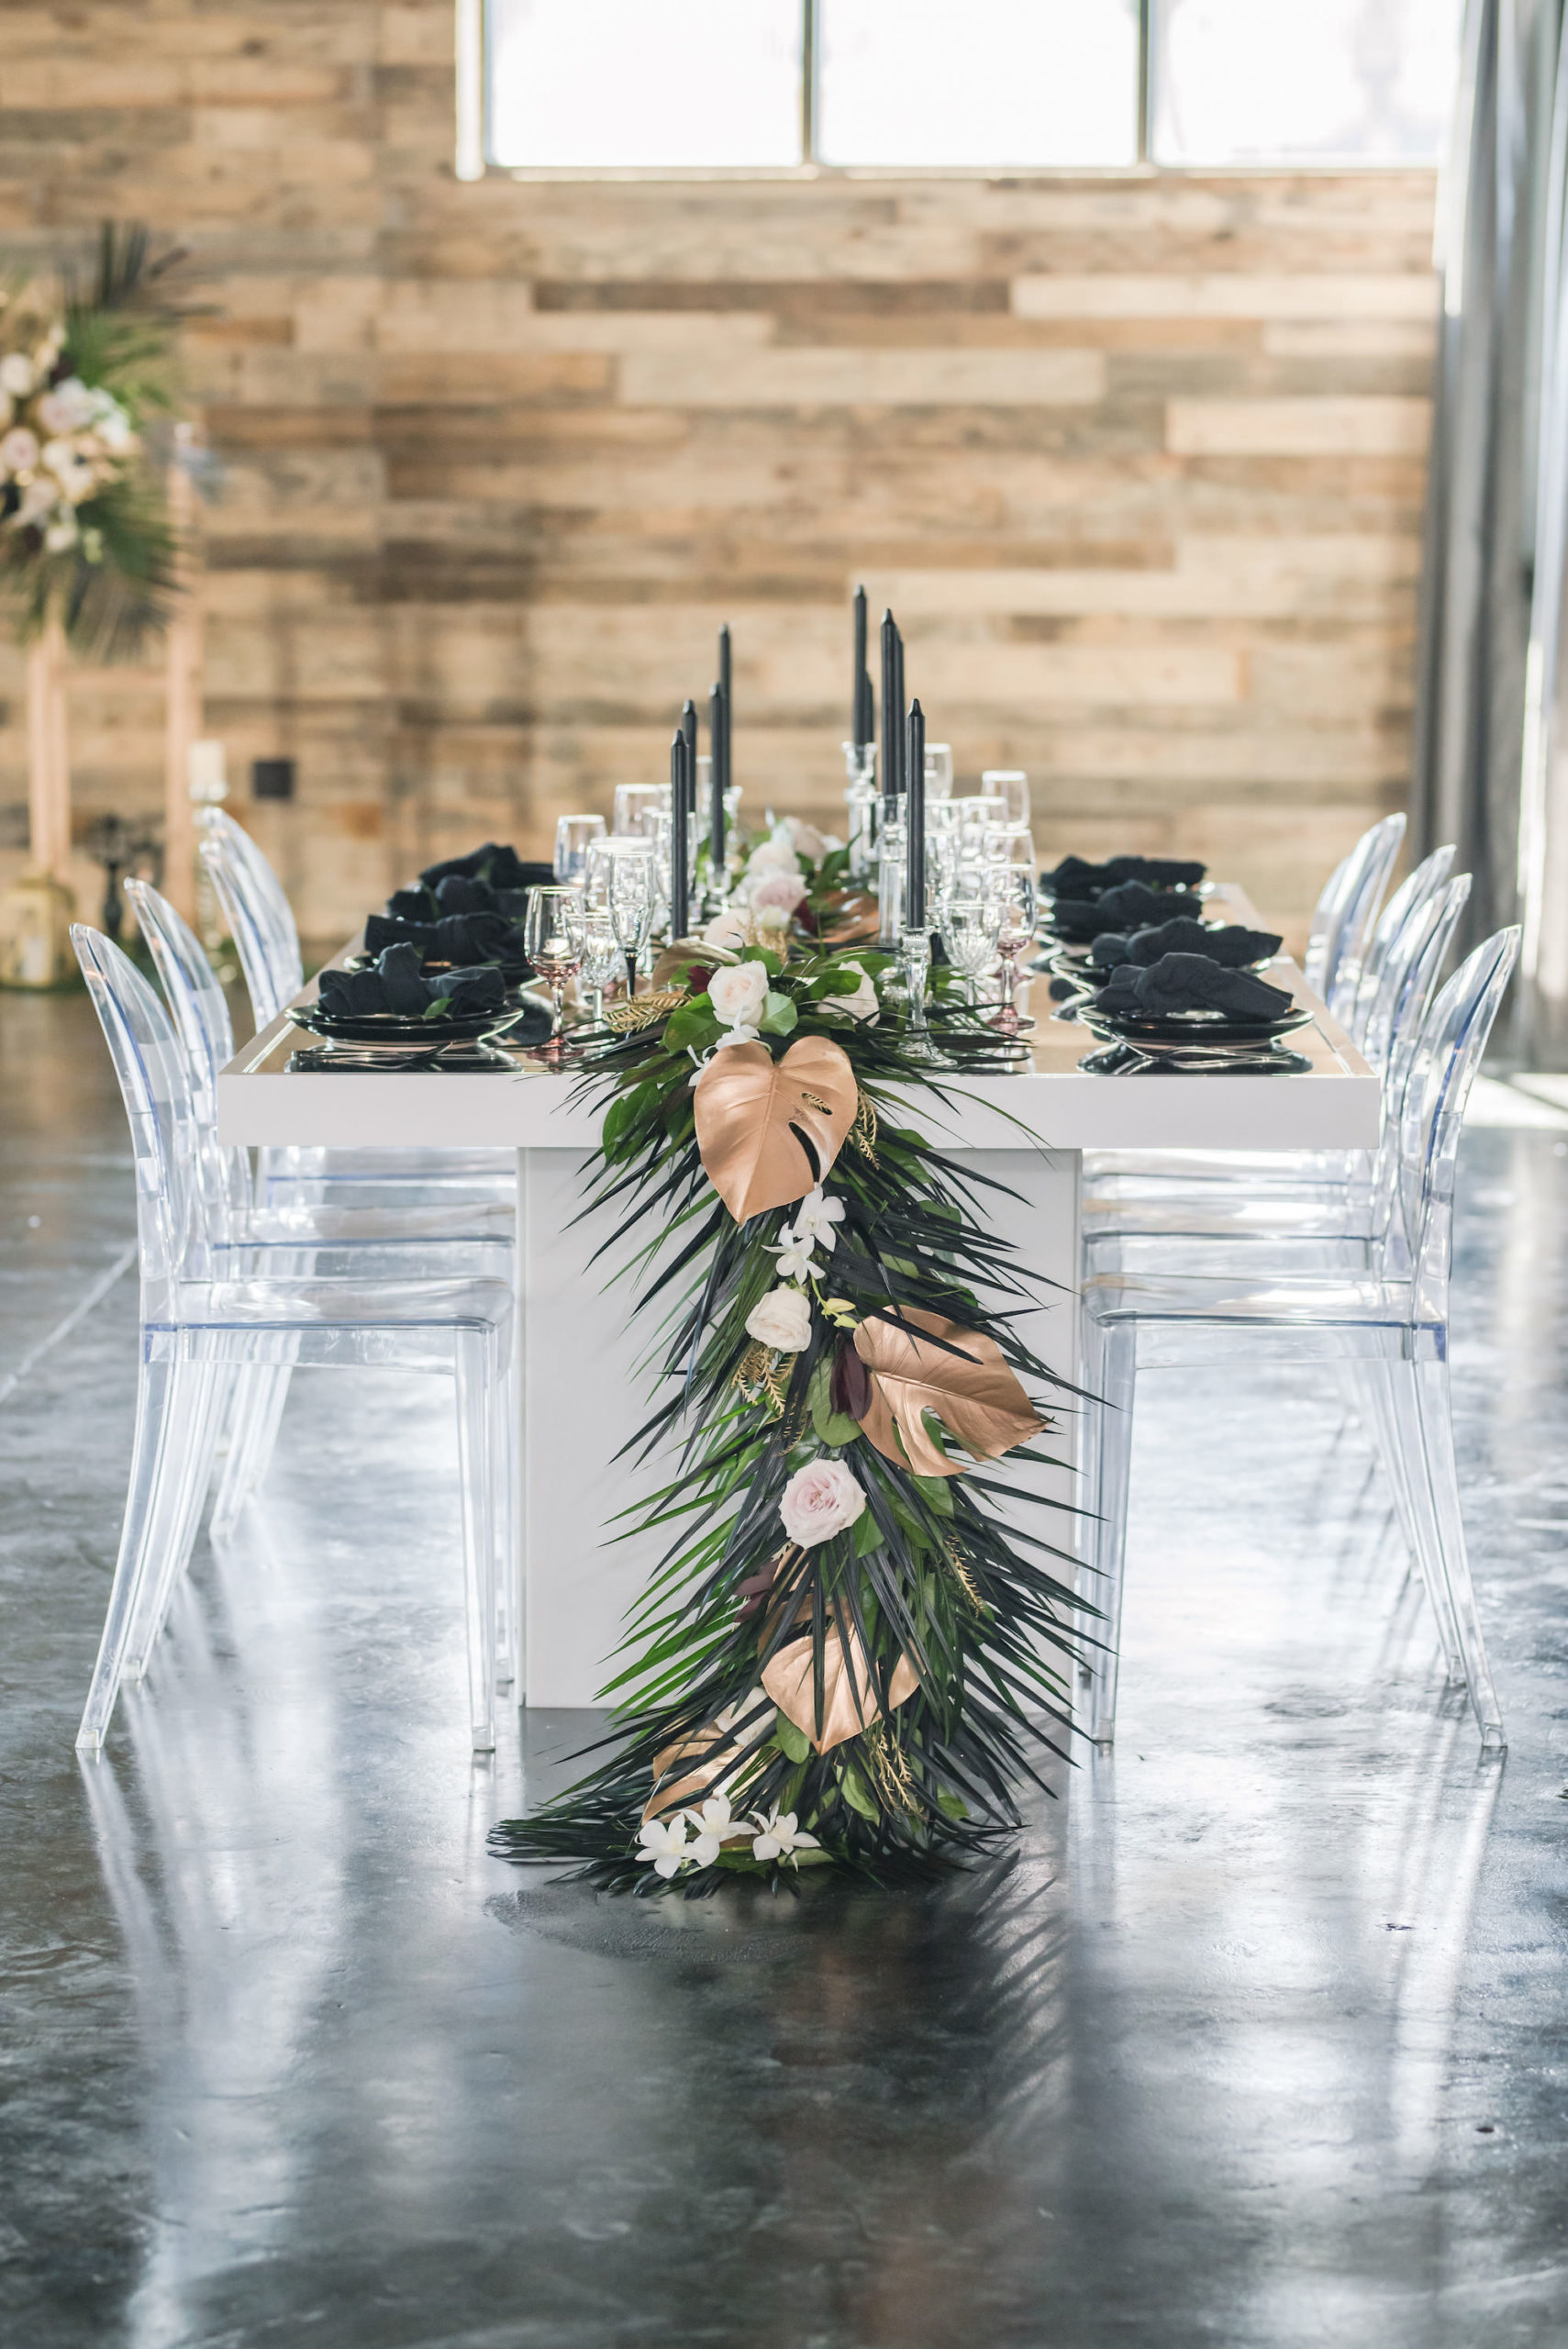 Dark Luxe, Romantic Wedding Styled Shoot Decor, Long White Table with Palm Fronds, Gold Painted Monstera Leaves, Blush Pink Table Runner, Black Candlesticks, Ghost Acrylic Chairs | Tampa Bay Wedding Planner Elegant Affairs by Design | Madeira Beach Wedding Venue The West Events Space